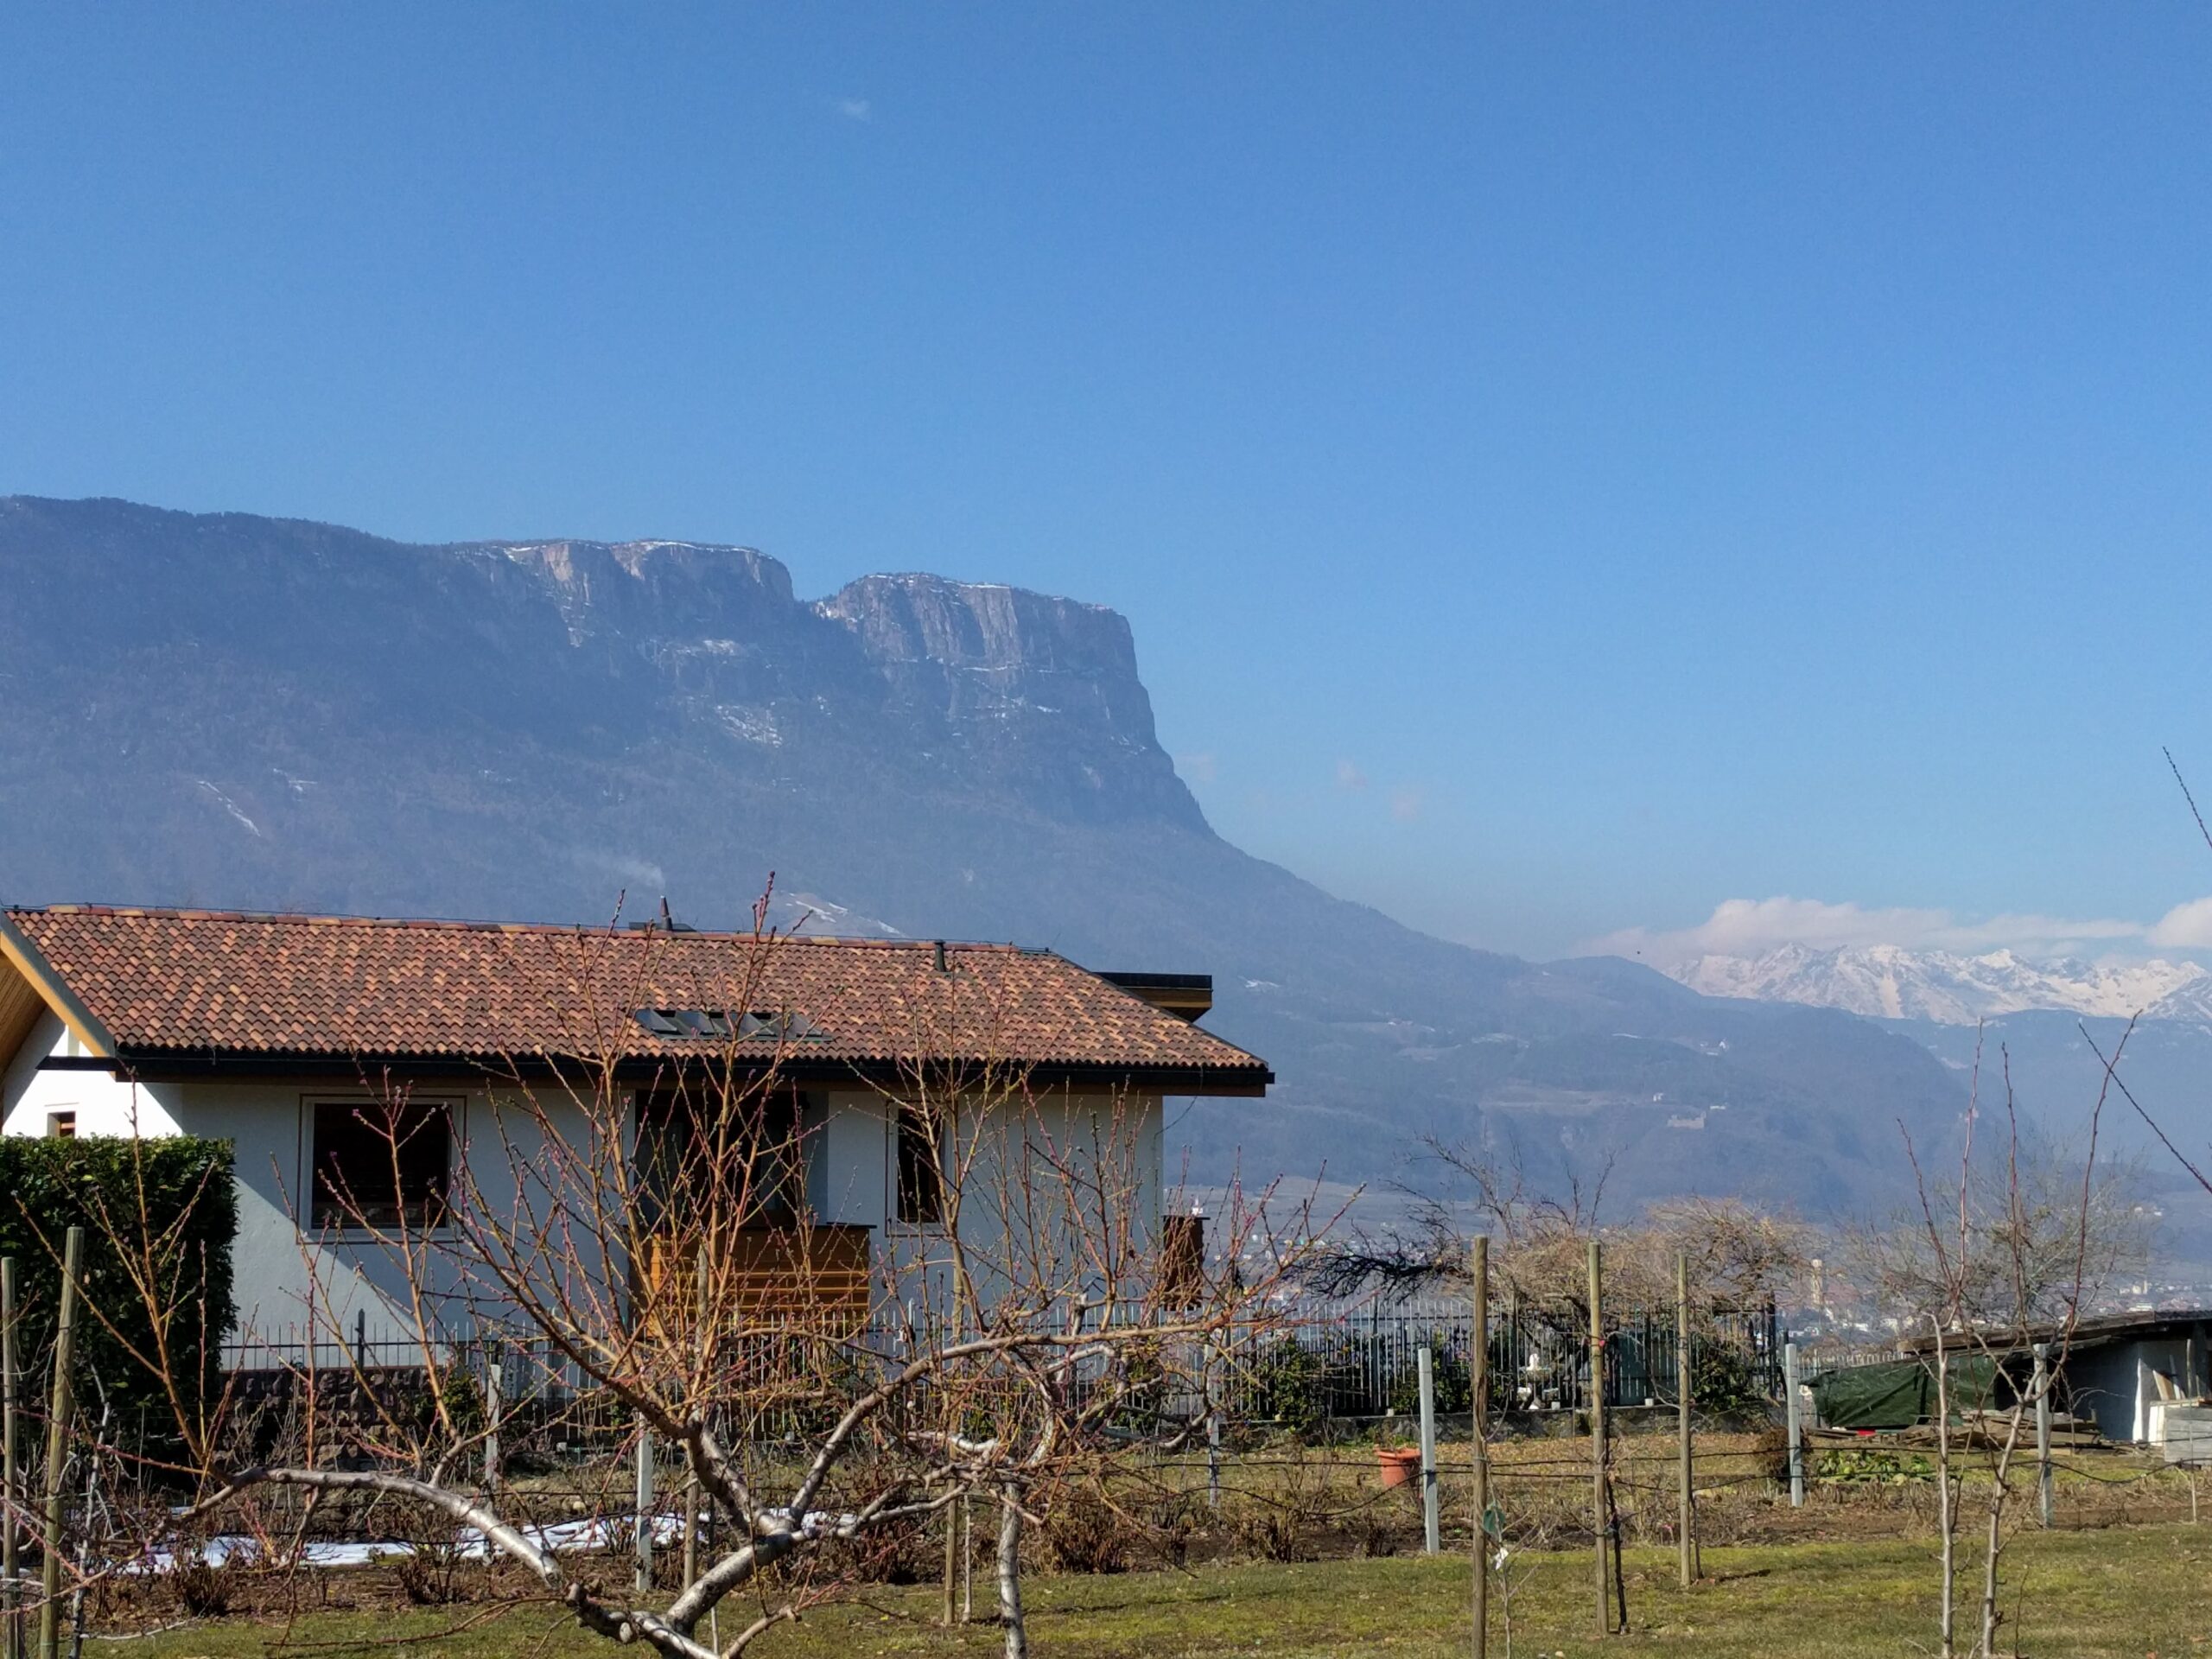 Picture of the Alps from Bolzano, Italy. Take at the Fedora Mindshare FAD in March 2018.